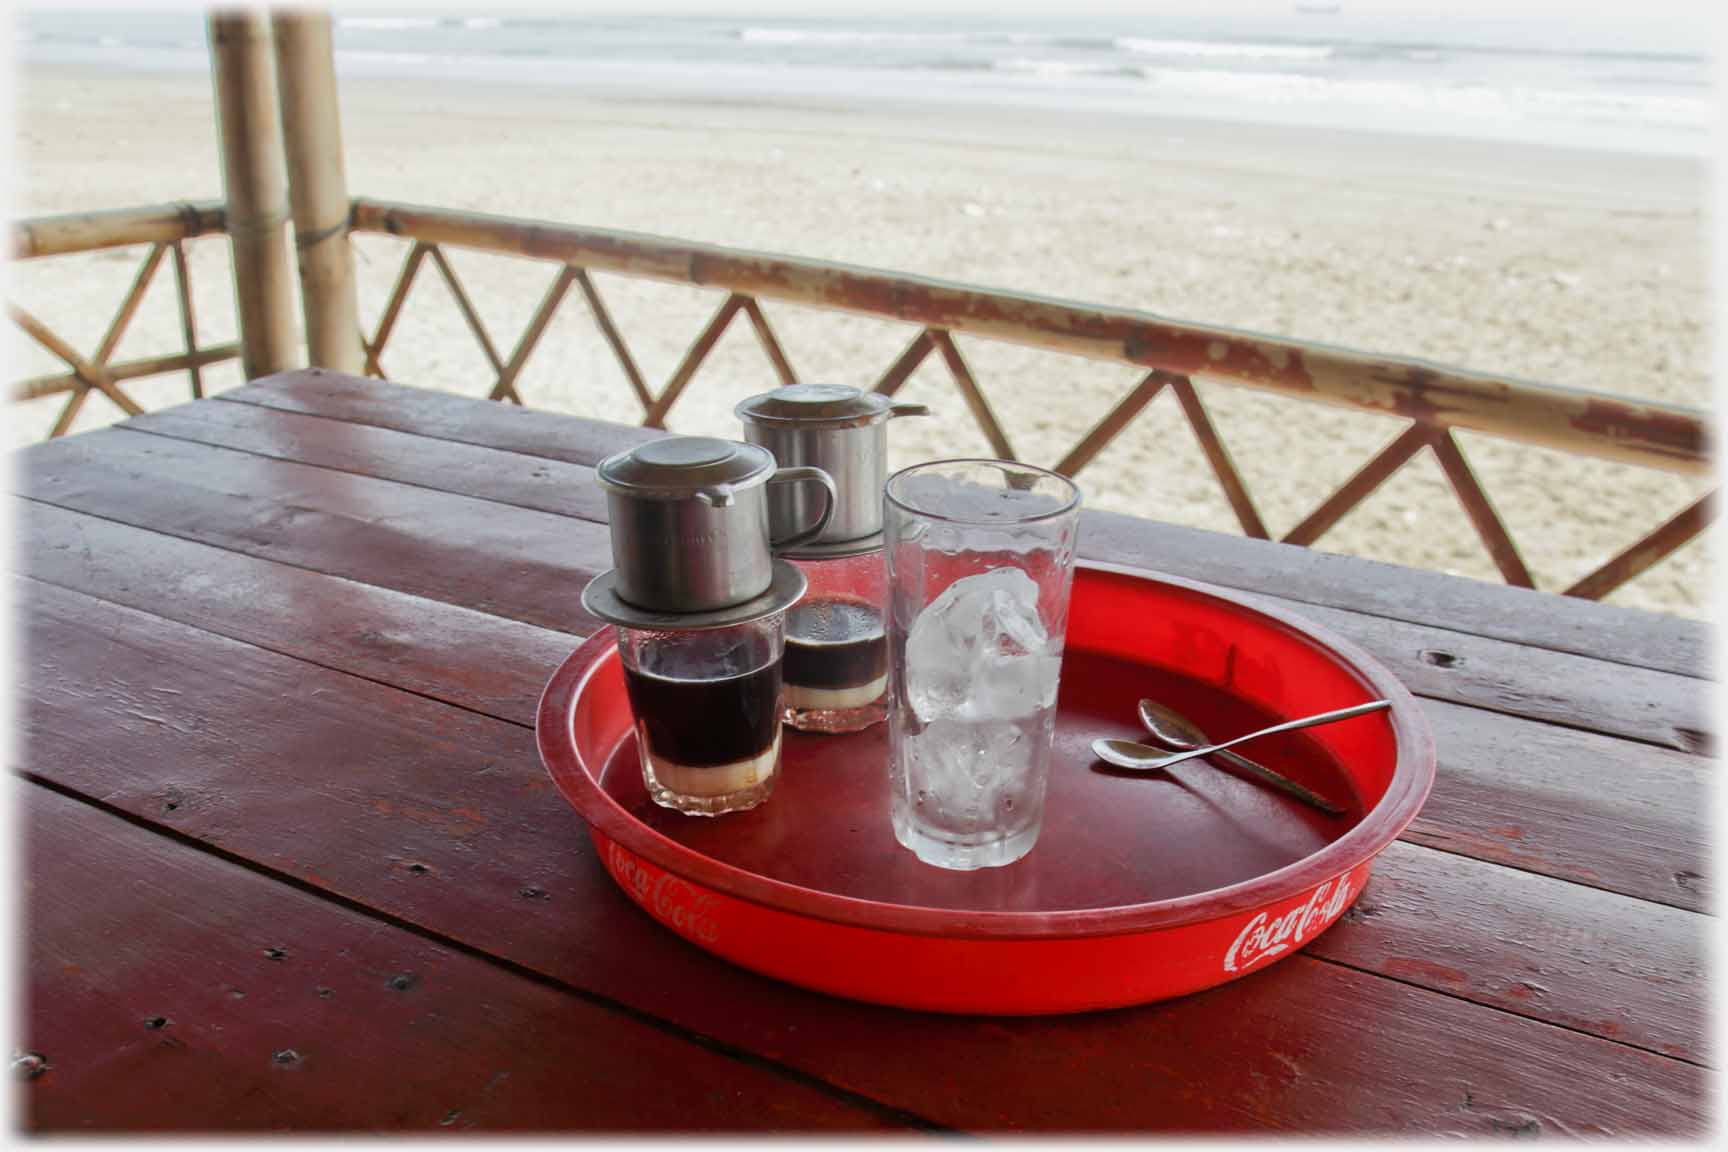 Two coffee glasses with filters sitting on them beside a glass of ice on table on veranda by beach.